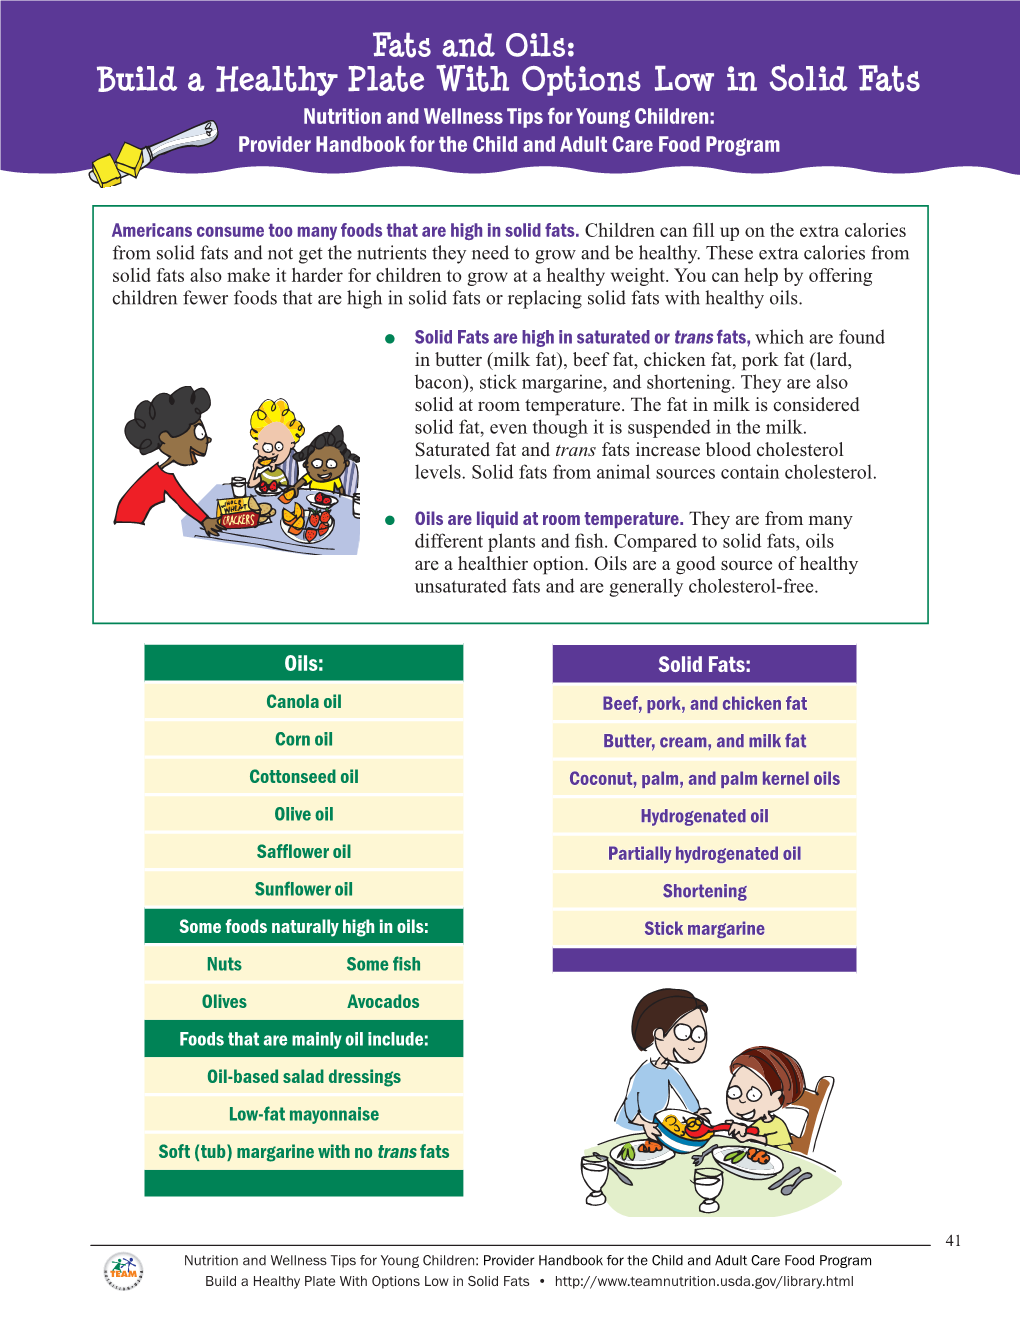 Build a Healthy Plate with Options Low in Solid Fats Nutrition and Wellness Tips for Young Children: Provider Handbook for the Child and Adult Care Food Program